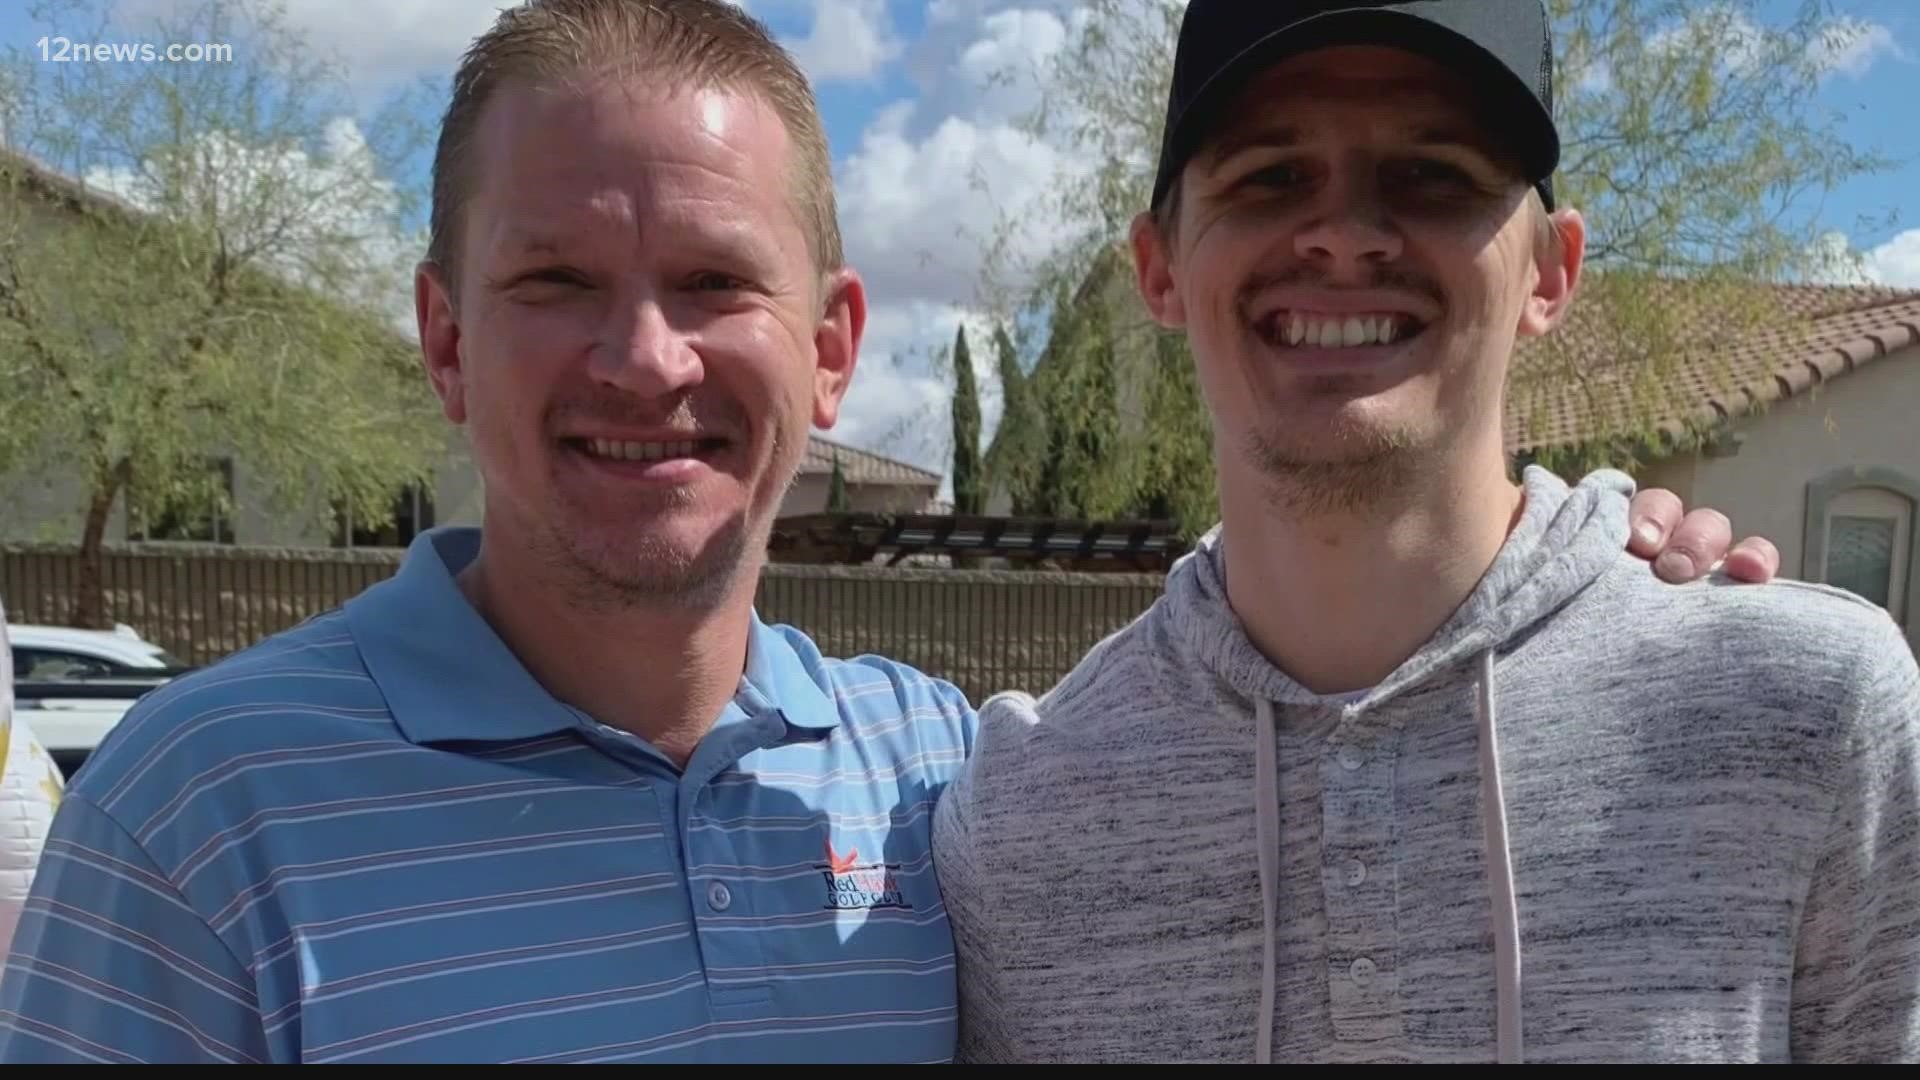 Andrew and Dillon Ryan are brothers that own the print shop that exploded in Chandler on Thursday. Their father shares an update on their recovery.